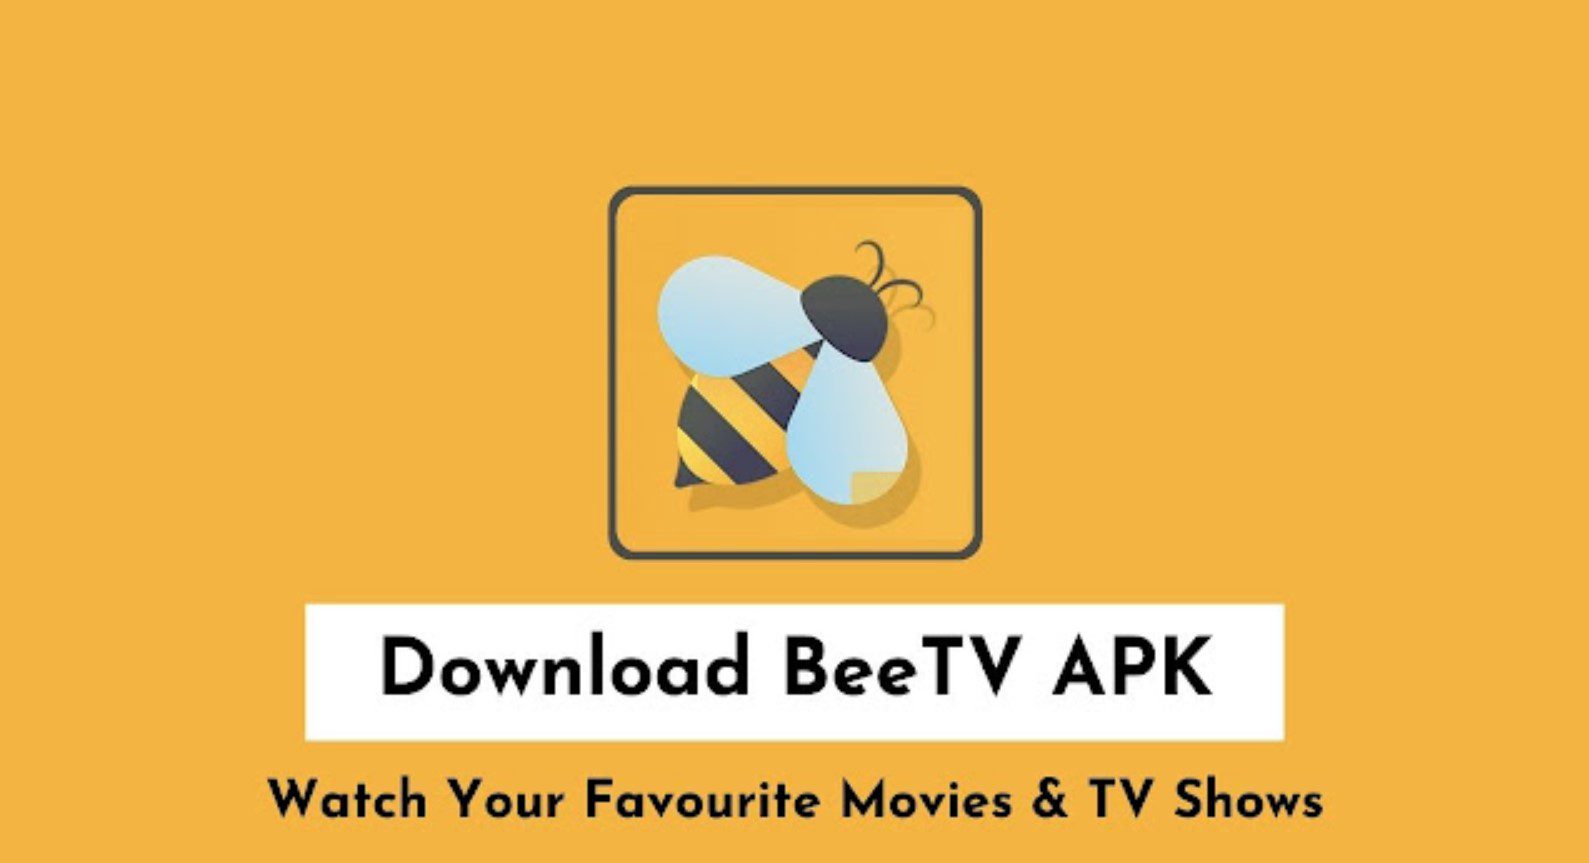 BeeTV Crack Mod APK: A modified version of BeeTV app with added features and unlocked premium content.